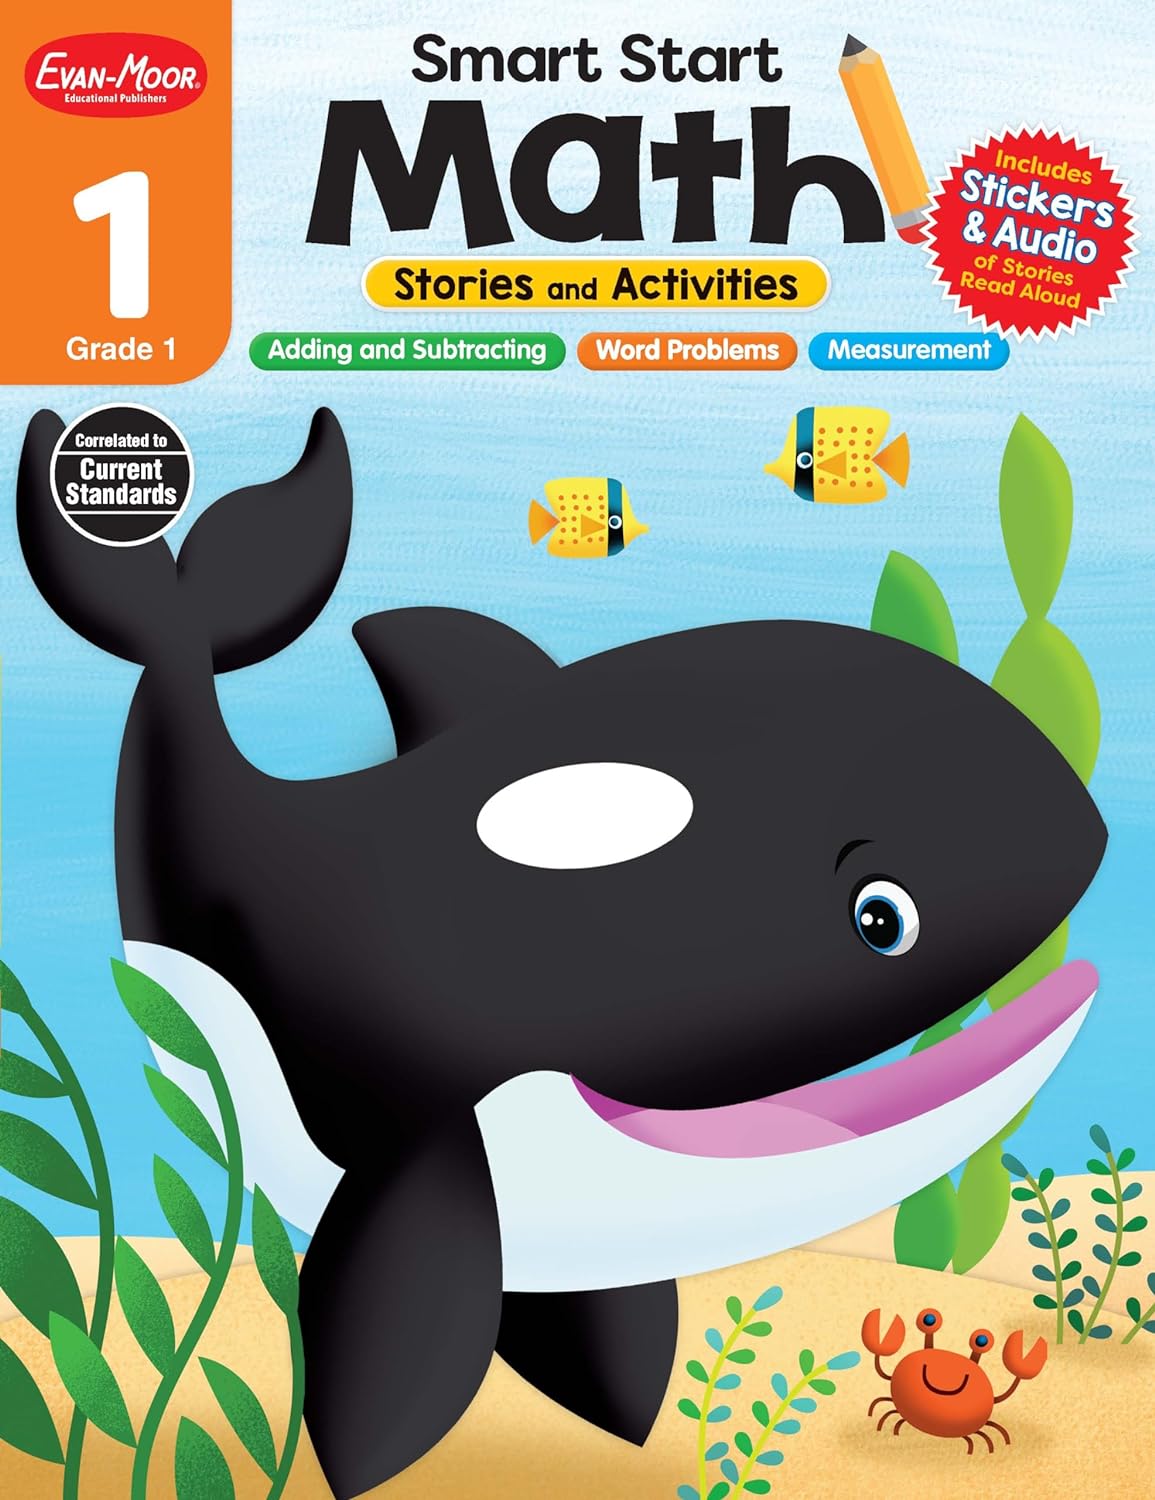 Evan - Moor Smart Start Math, Grade 1 Workbook, Stickers, Audio Read Alouds, Stories And Activities, Learn Numbers, Counting, Measurment, Addition, ... (Smart Start: Math Stories And Activities)